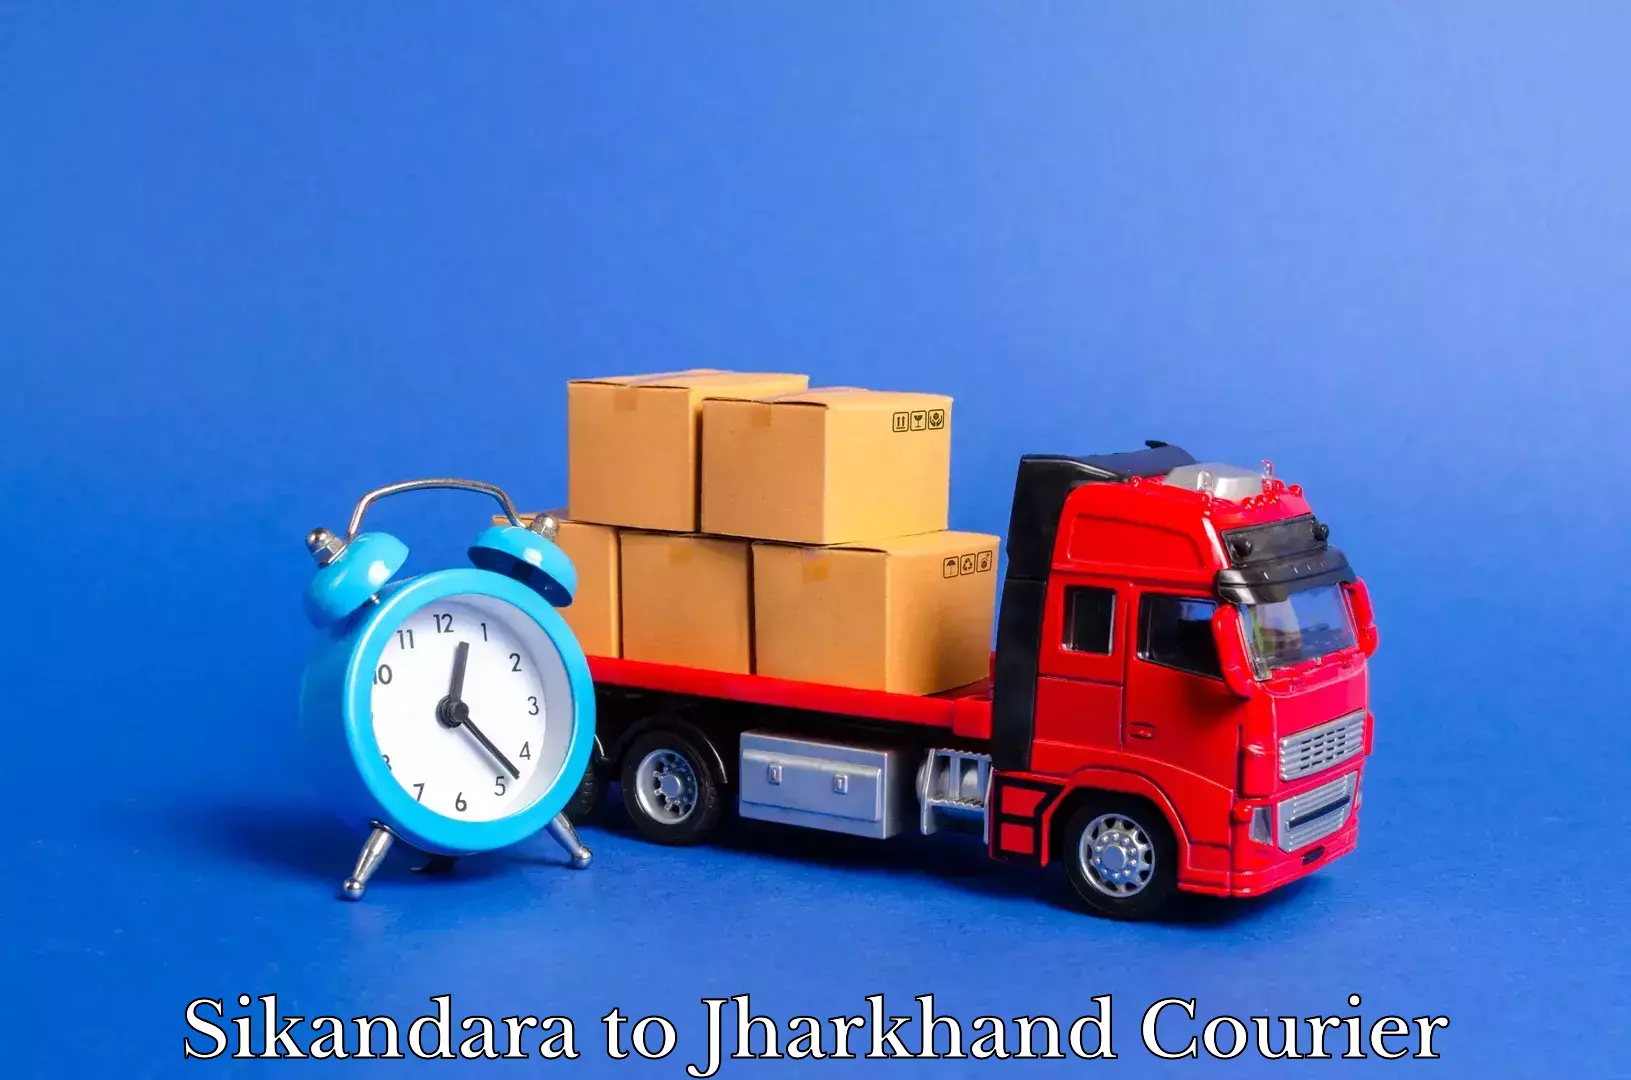 Affordable household movers in Sikandara to Jharkhand